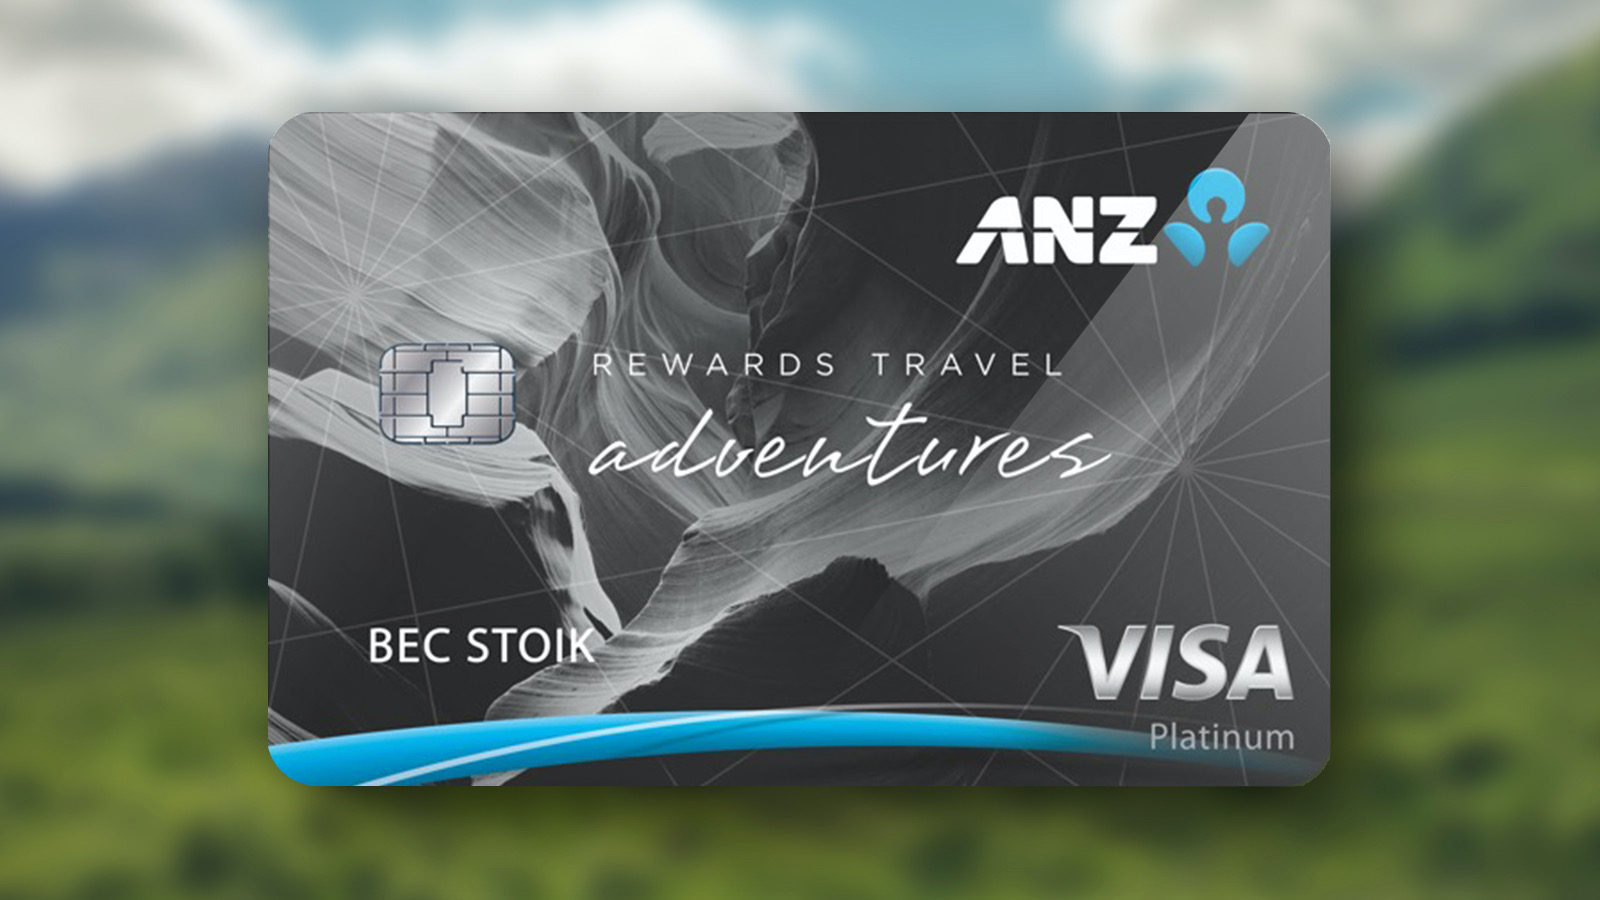 anz credit card for travel